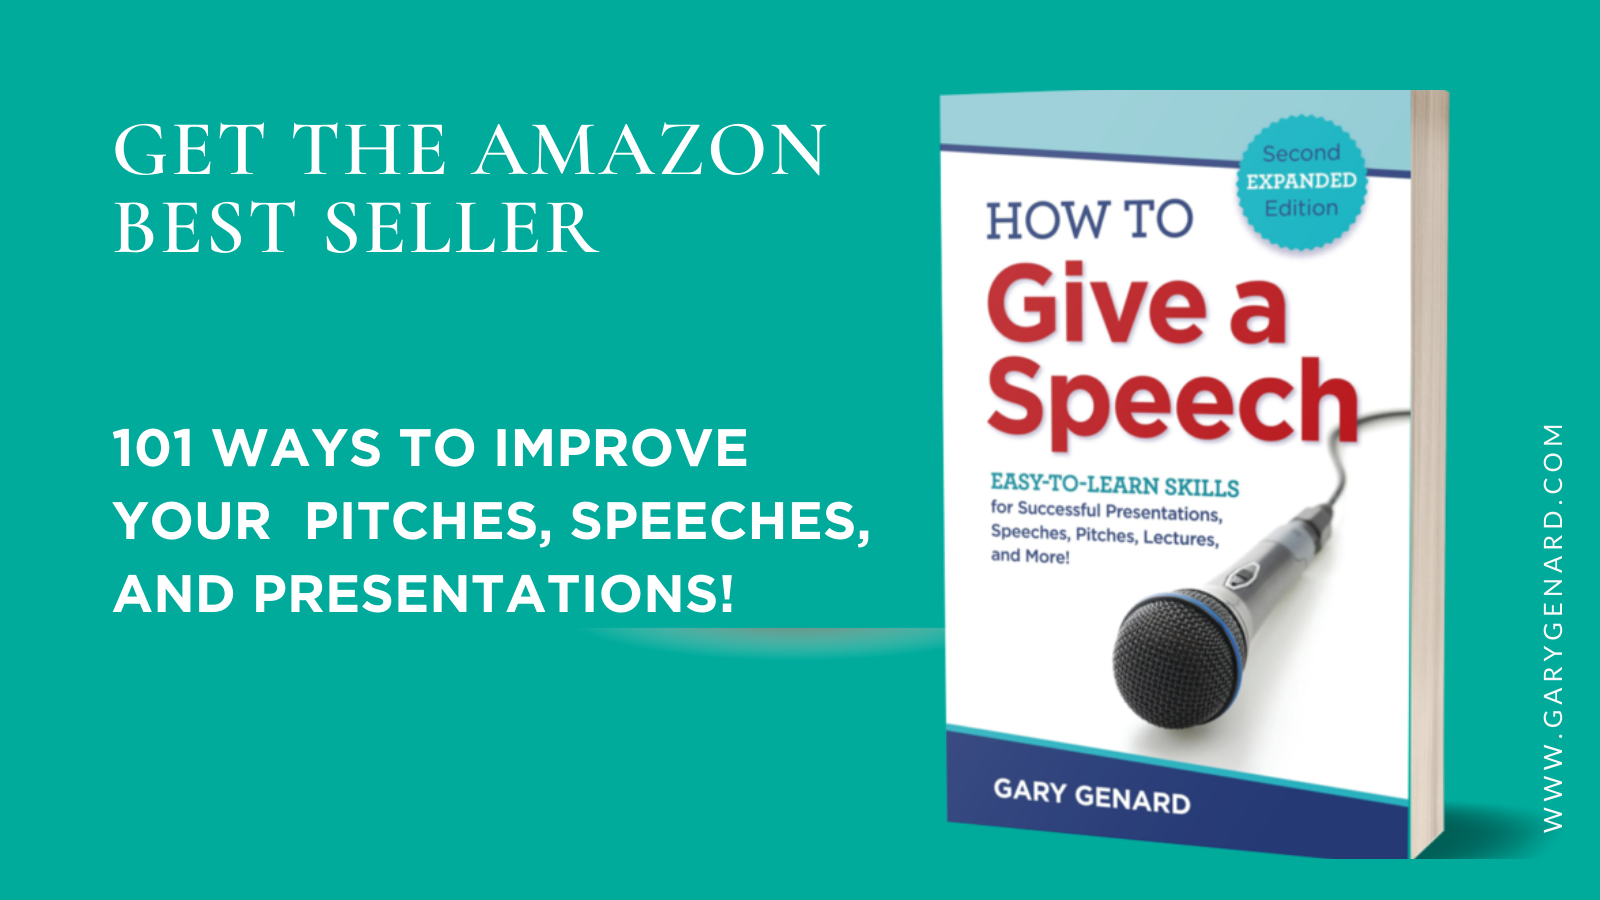 Dr. Gary Genard's book on speaking skills for business, The Public Speaking Handbook, How to Give a Speech